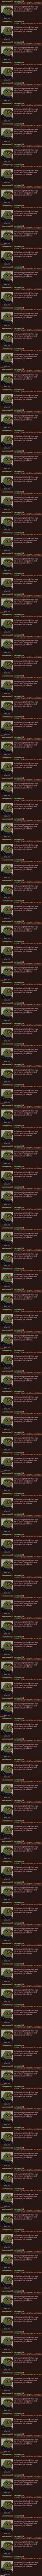 When an anonymous Pepe is correct, we blast its wisdom to the heavens | image tagged in anonymous pepe x6 x6 x3,anonymous,pepe,pepe the frog,spam,politics lol | made w/ Imgflip meme maker